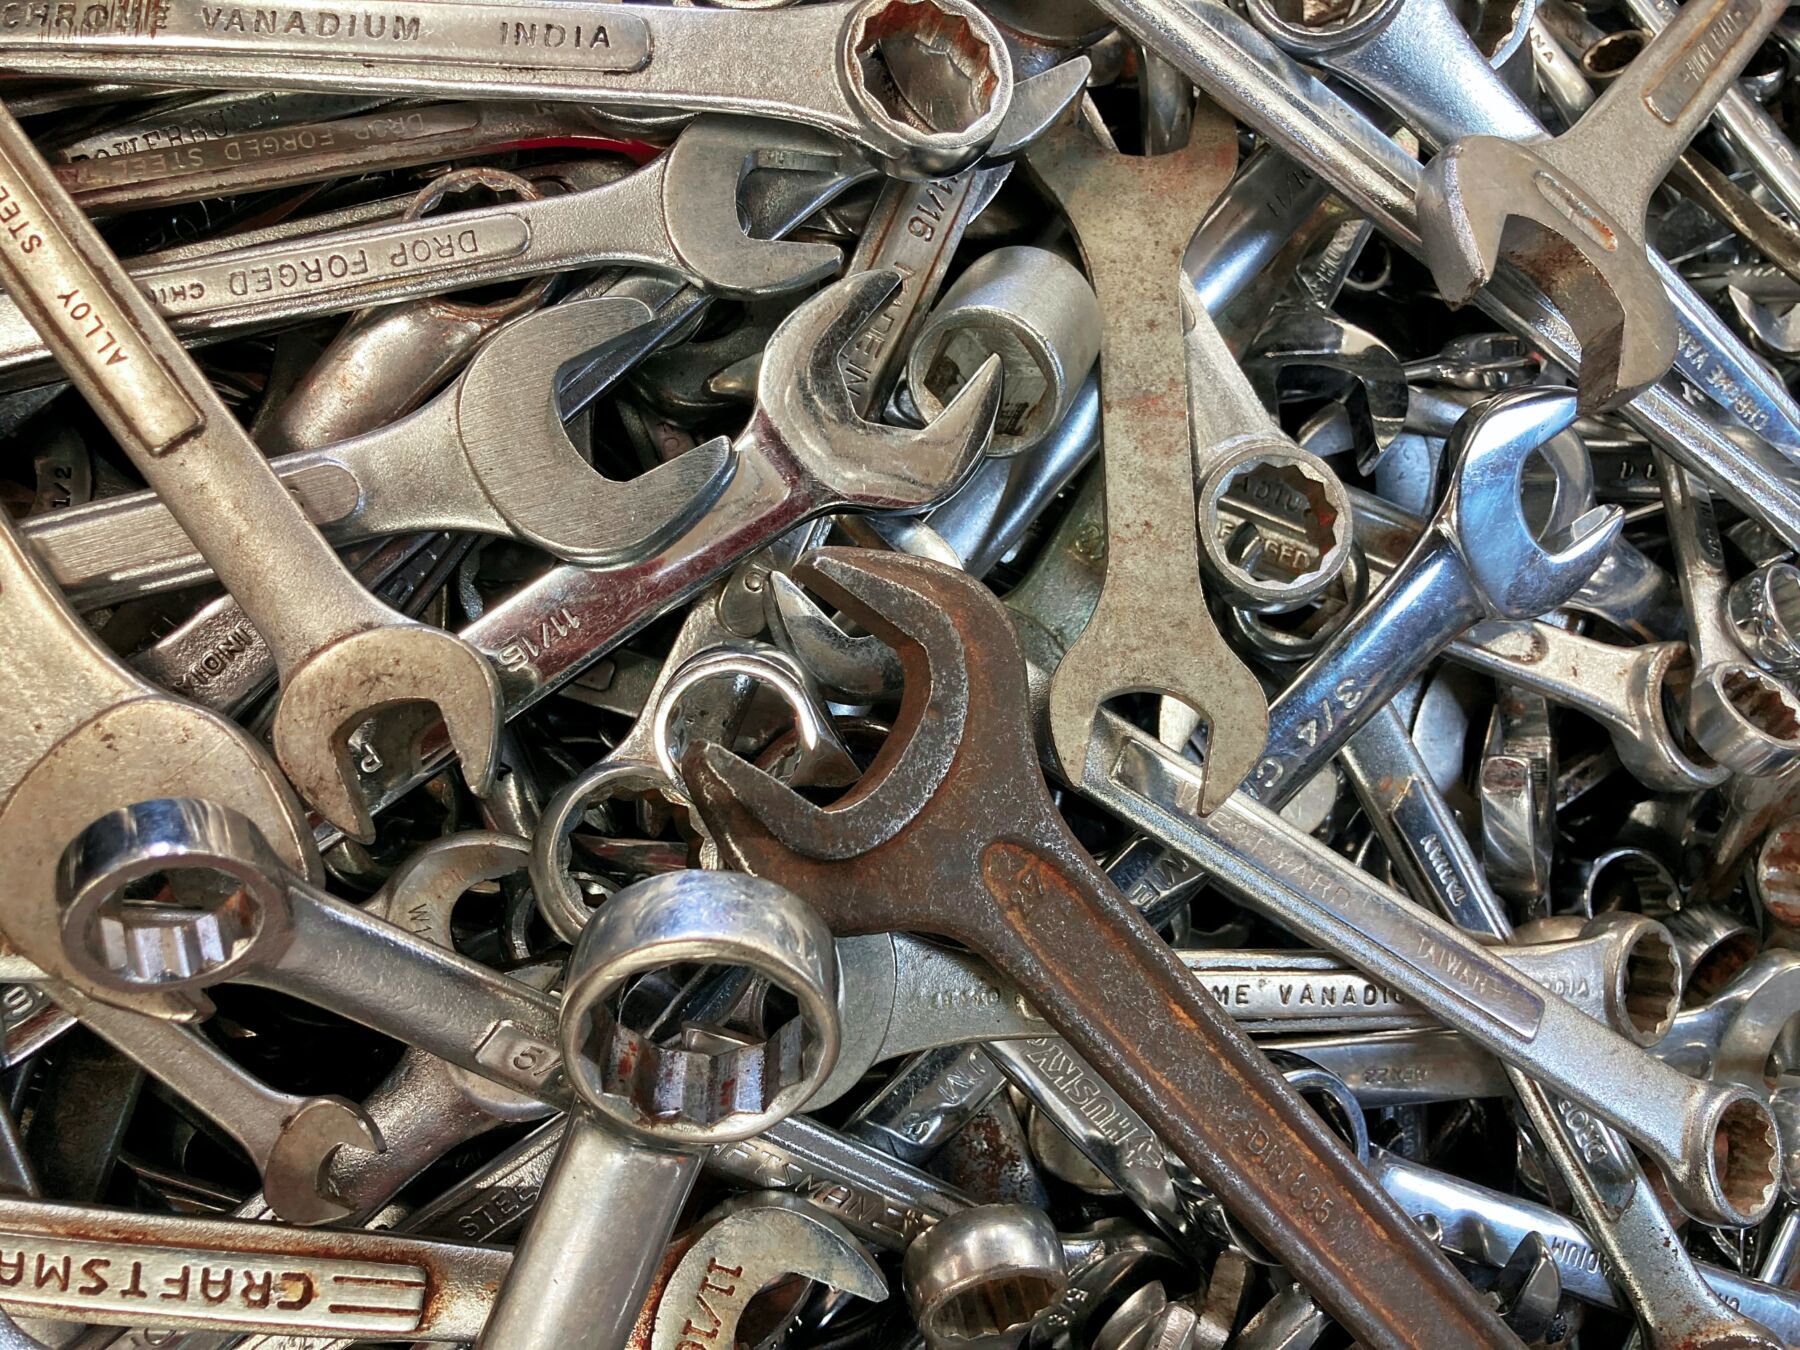 Image of assortment of hand tools used for garage door repair, mostly wrenches.